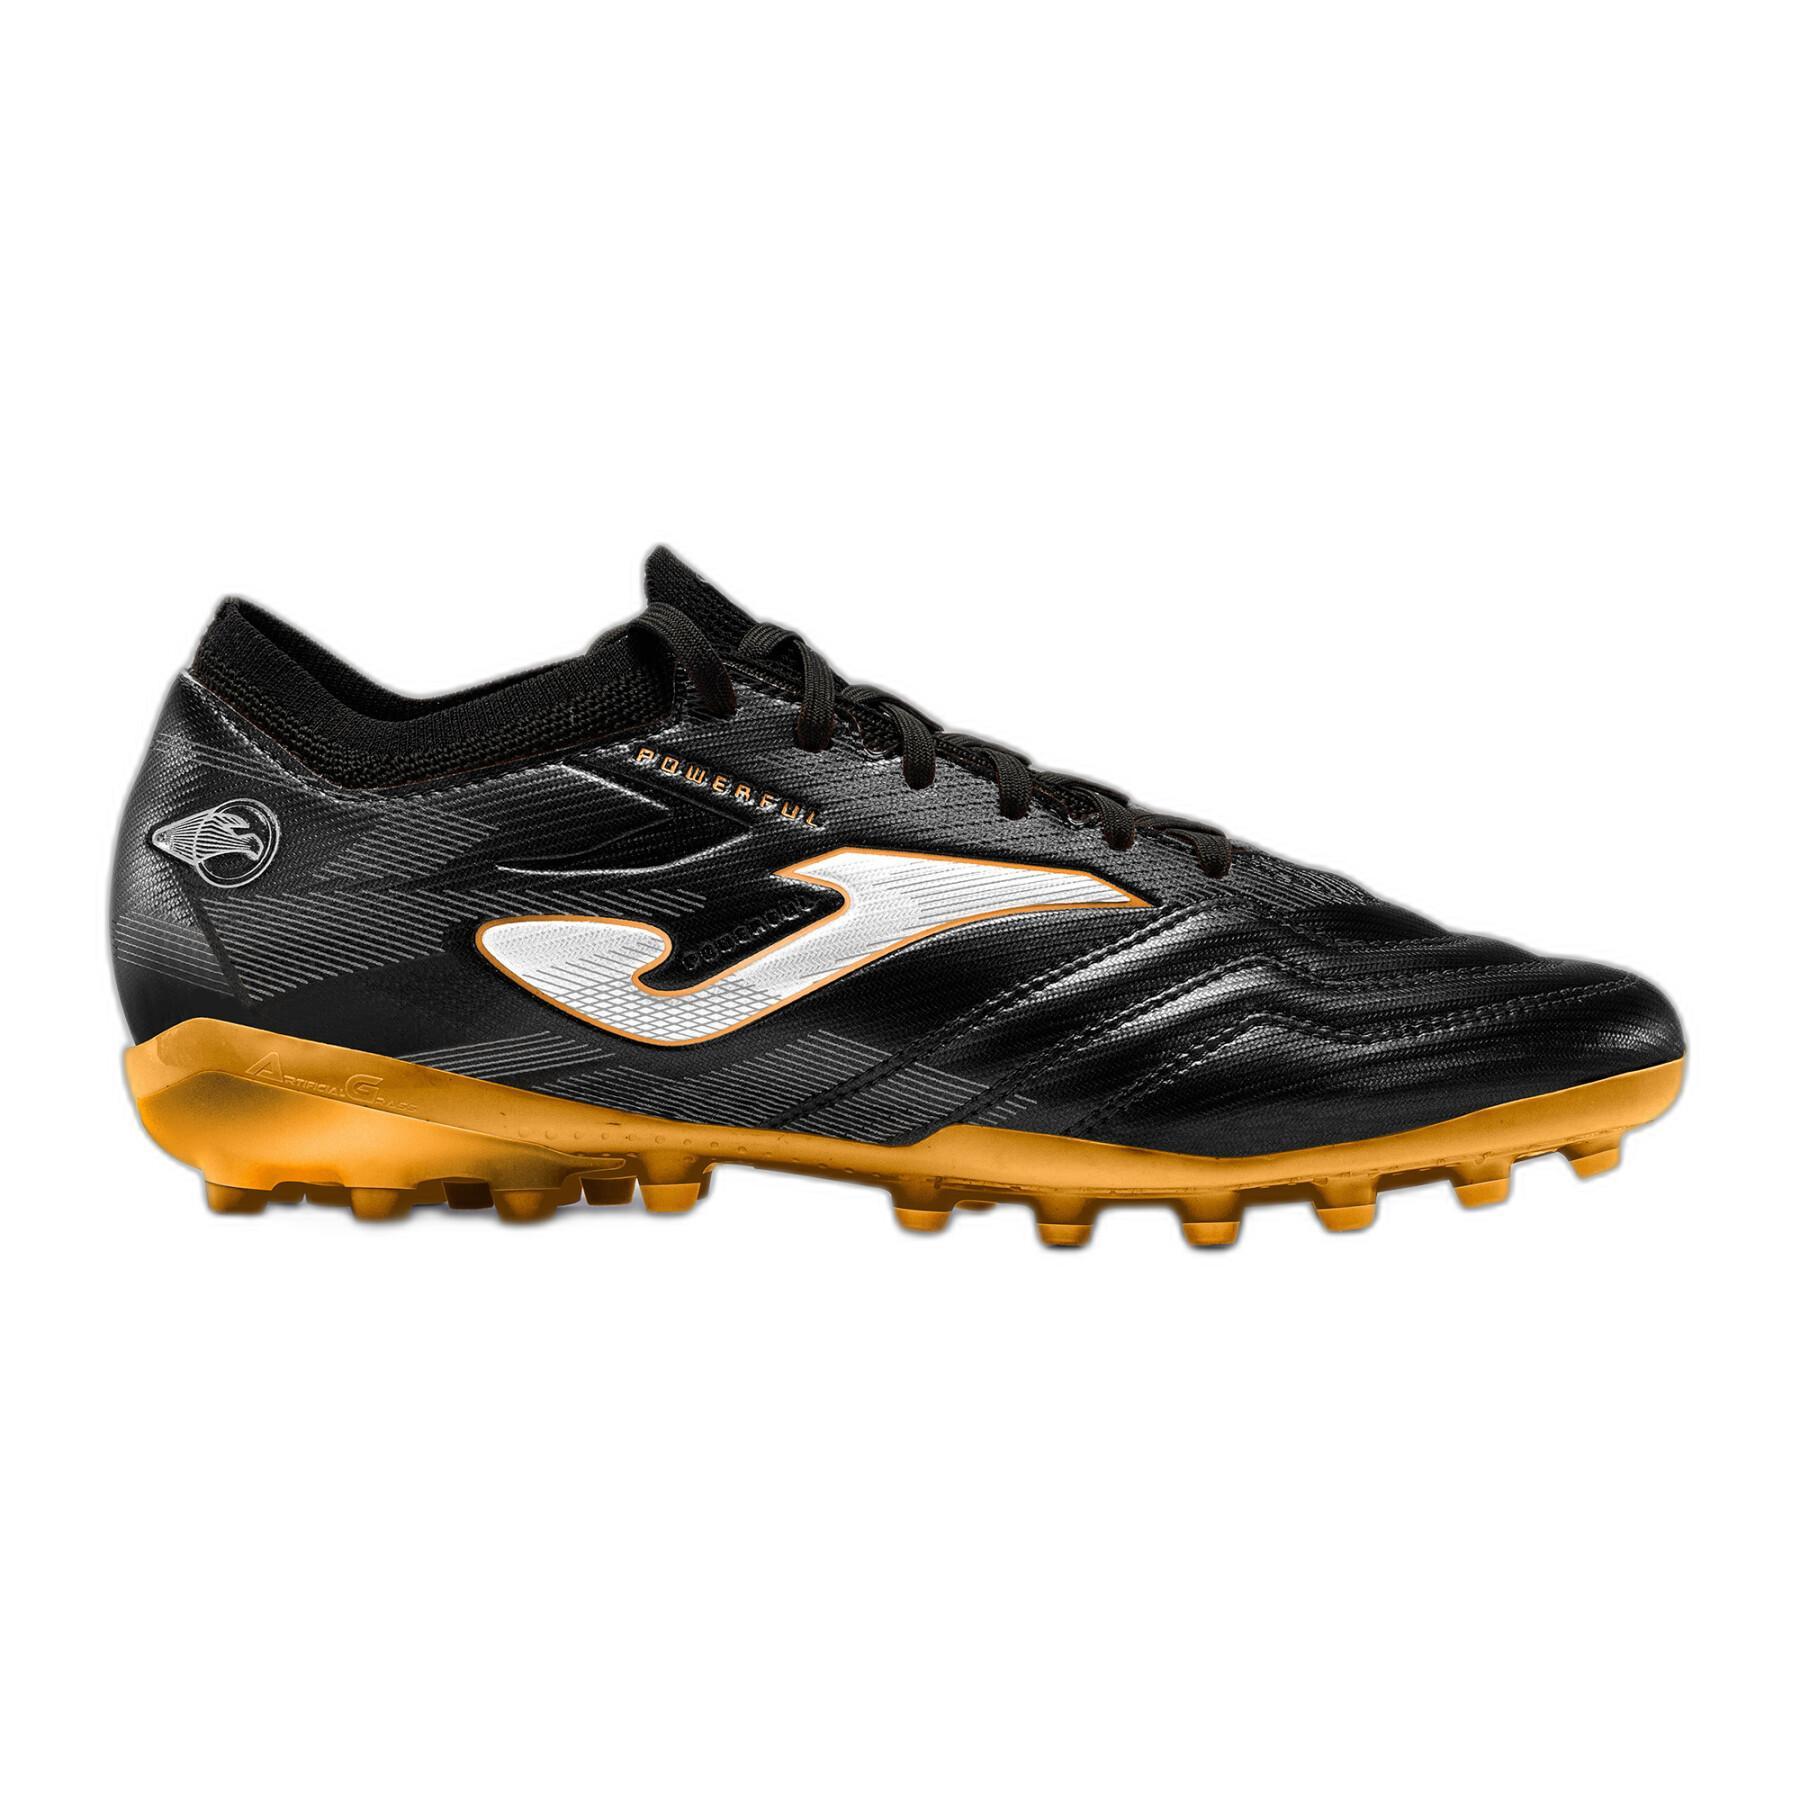 Chaussures de football Joma Powerful Cup 2401 AG